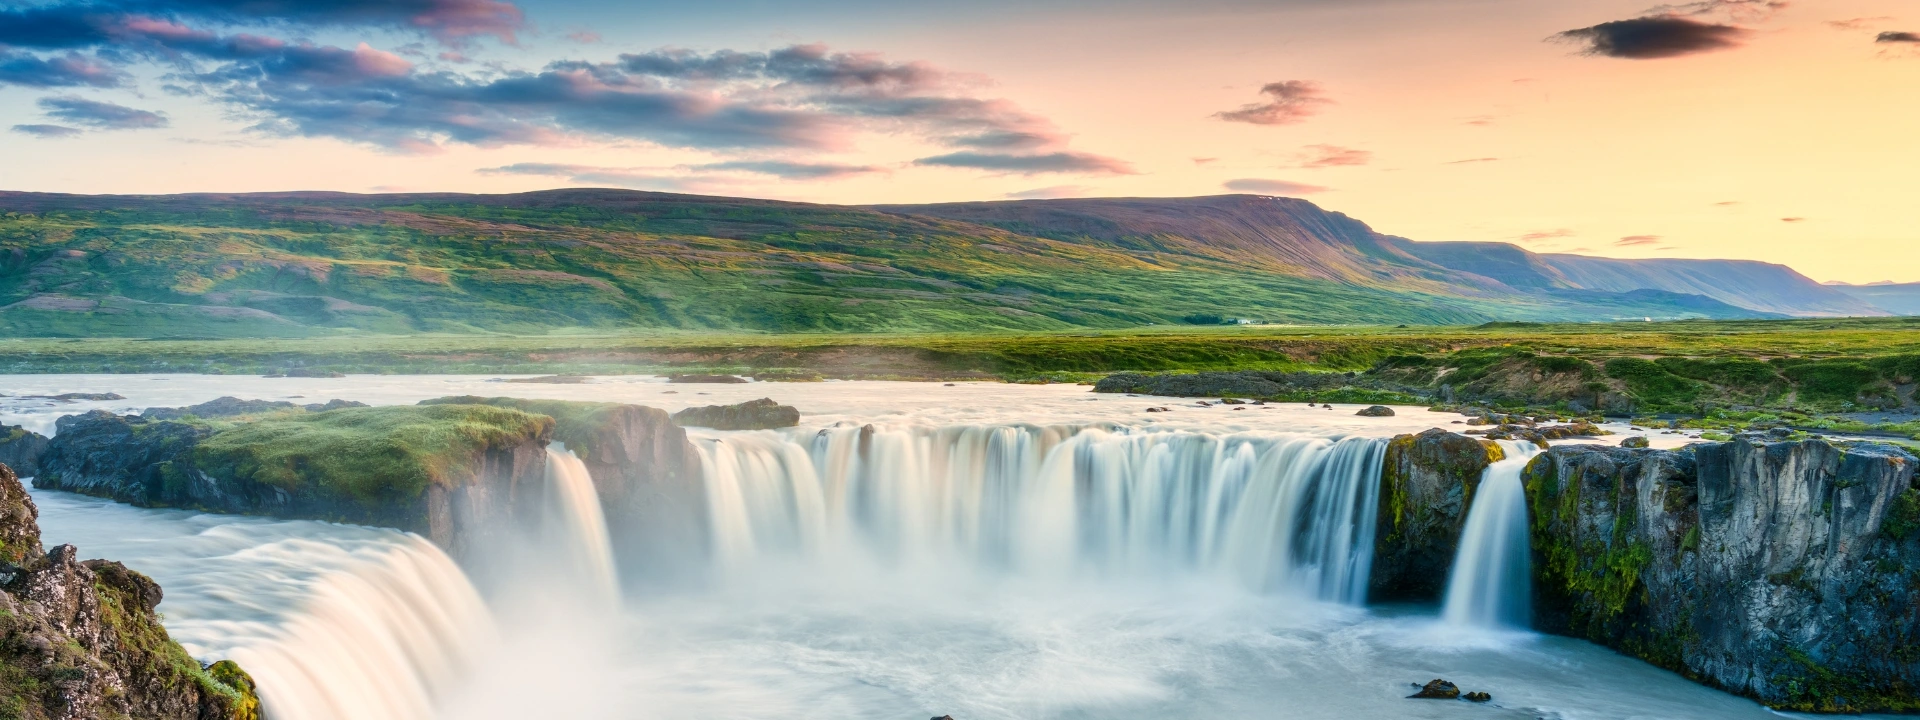 Iceland - Godafoss waterfall flowing with colorful sunset sky in summer at Iceland